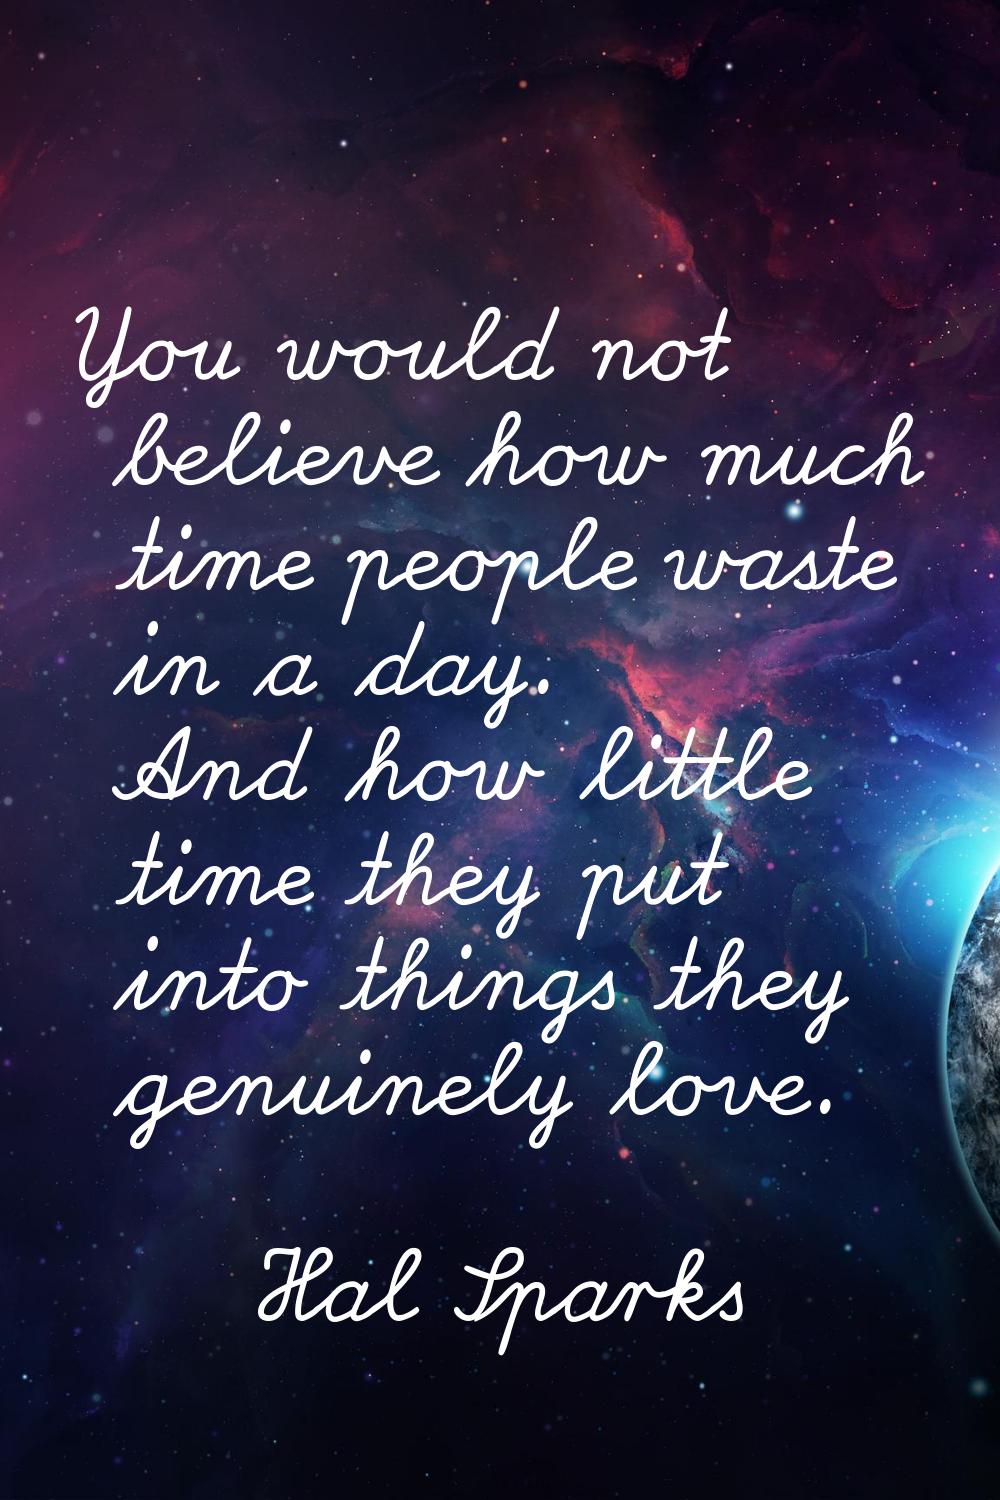 You would not believe how much time people waste in a day. And how little time they put into things